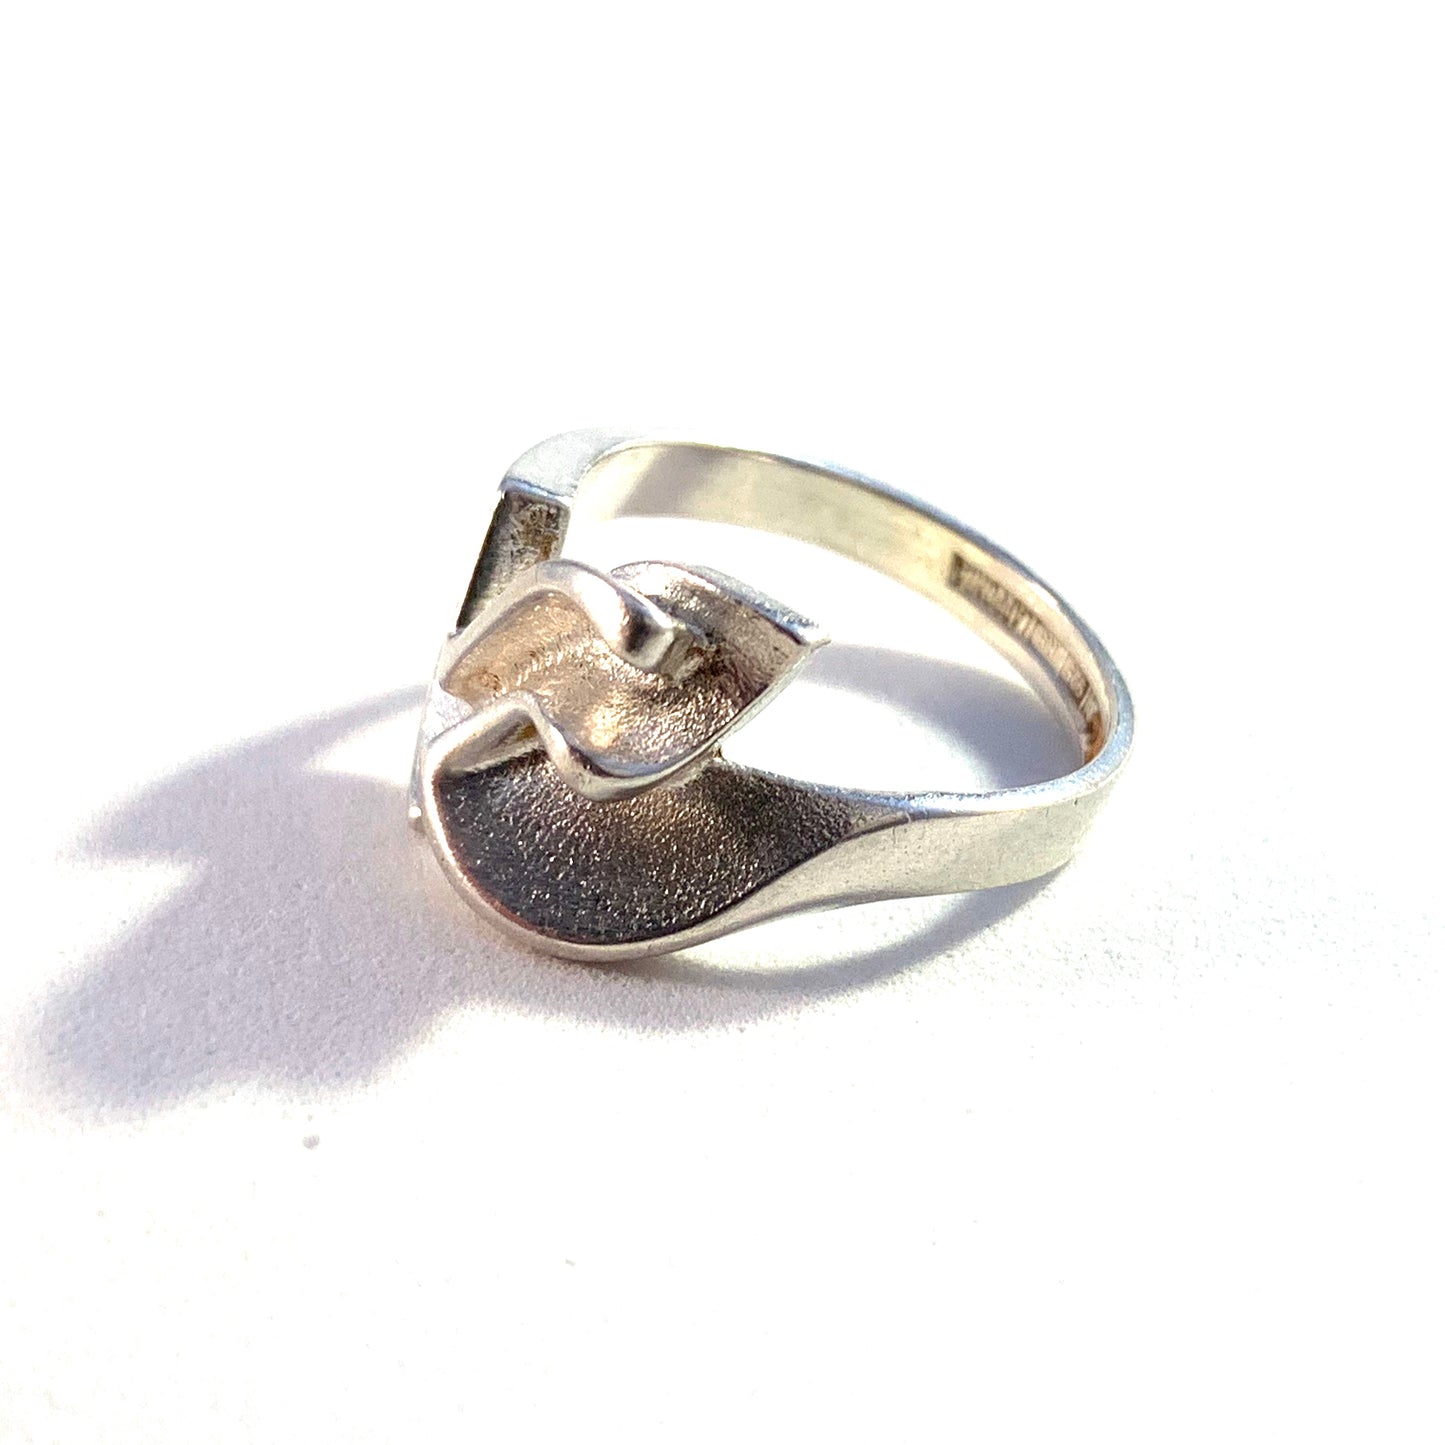 Lapponia, Finland Vintage 1987 Sterling Silver Ring.